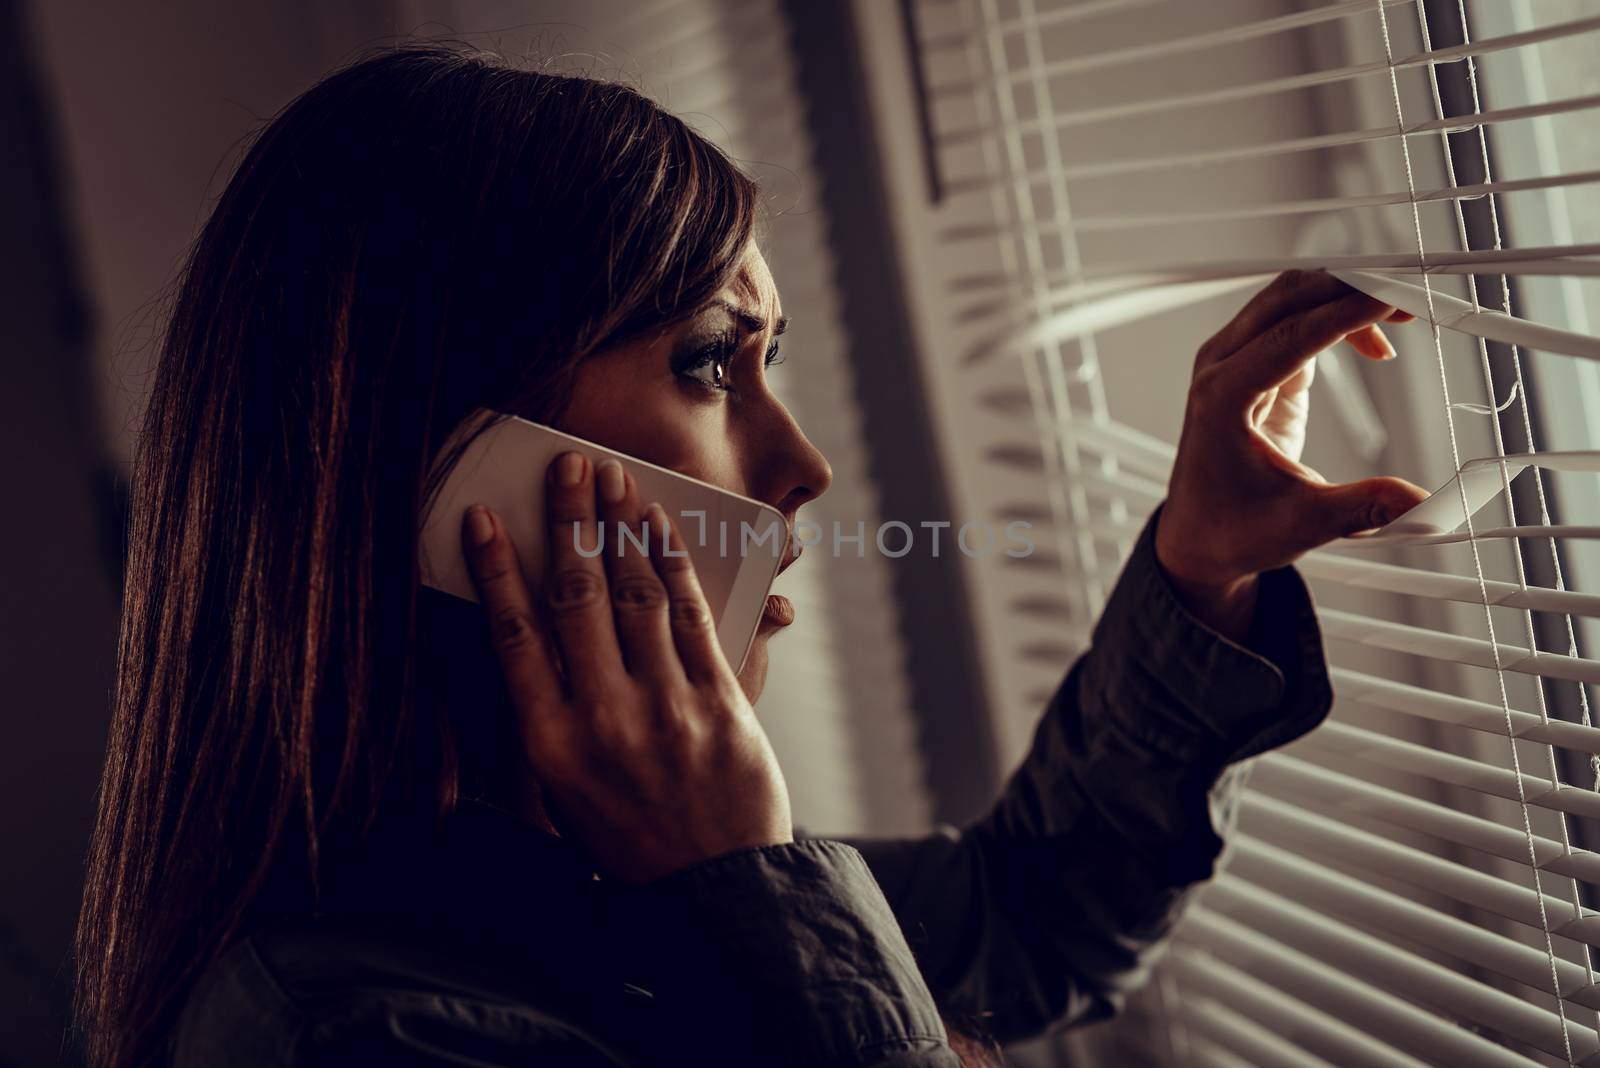 Young abused woman scared looking through the window seeking safety.